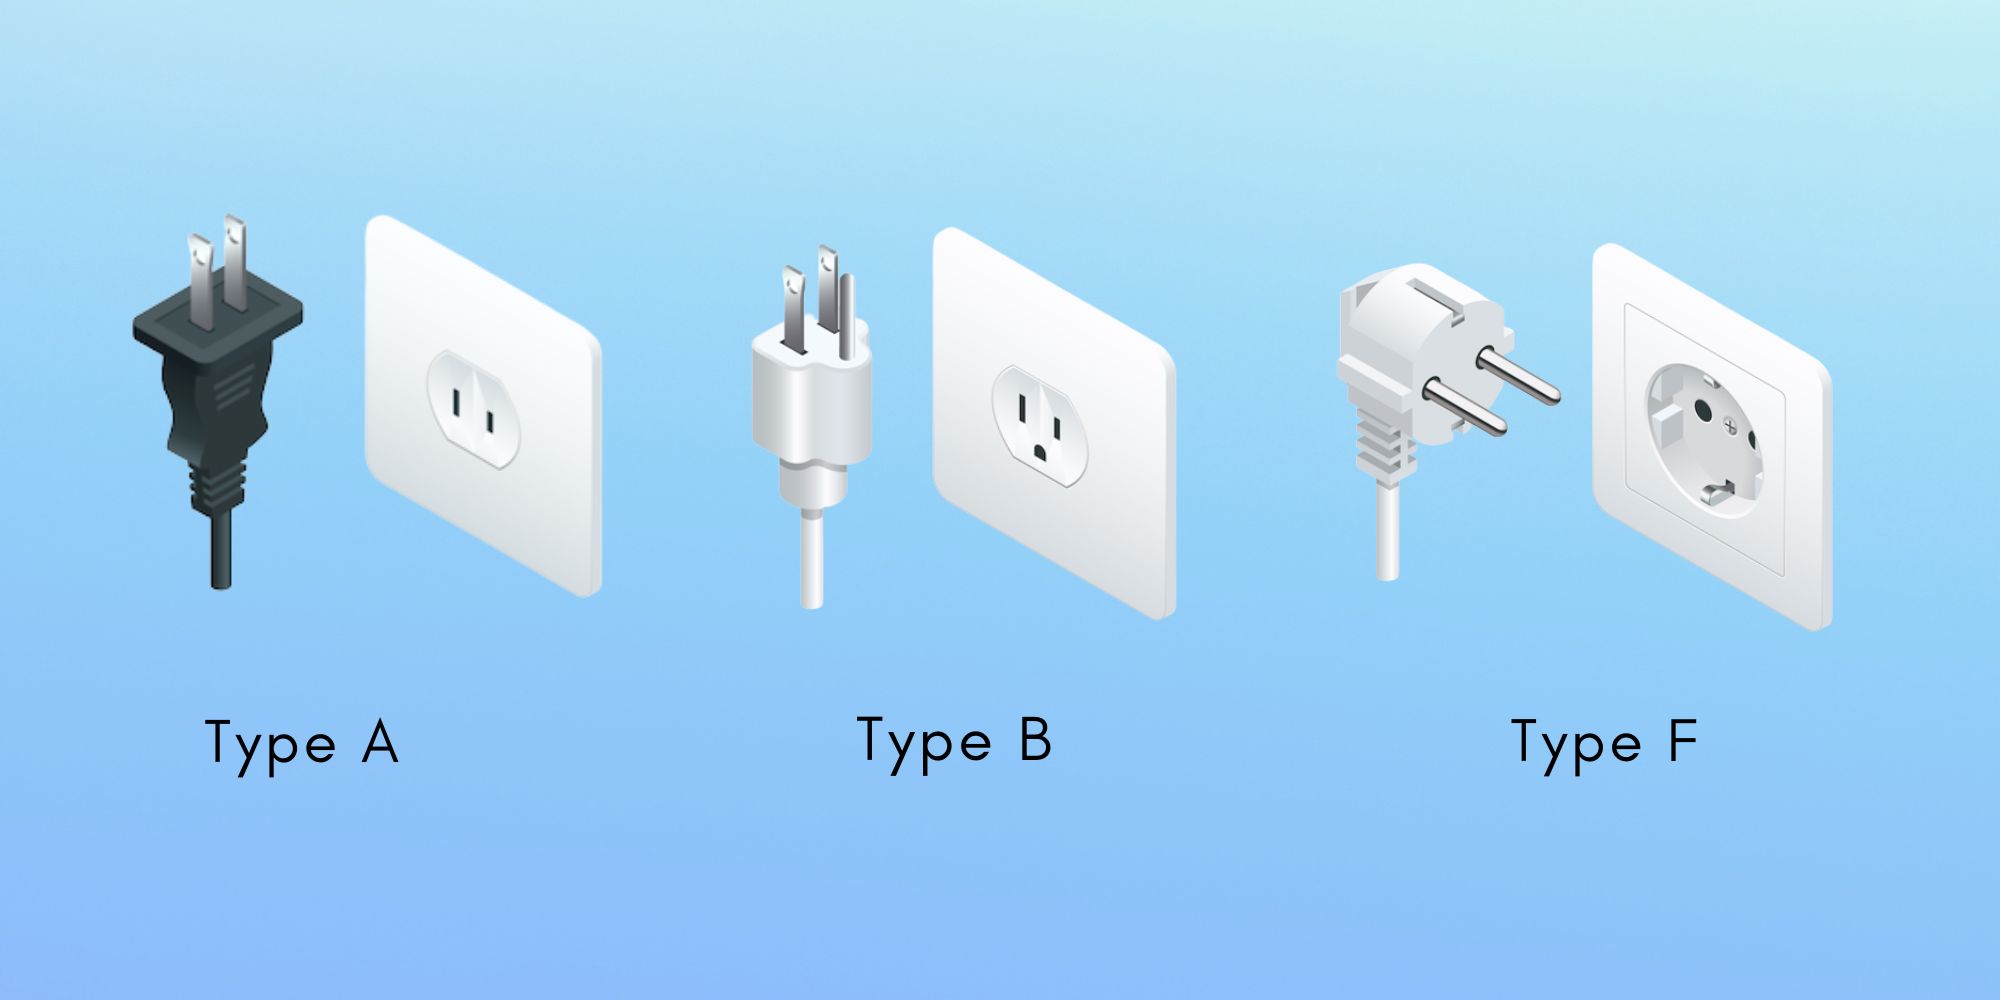 Aruba Power Plugs and Sockets: Type A, Type B, and Type F
